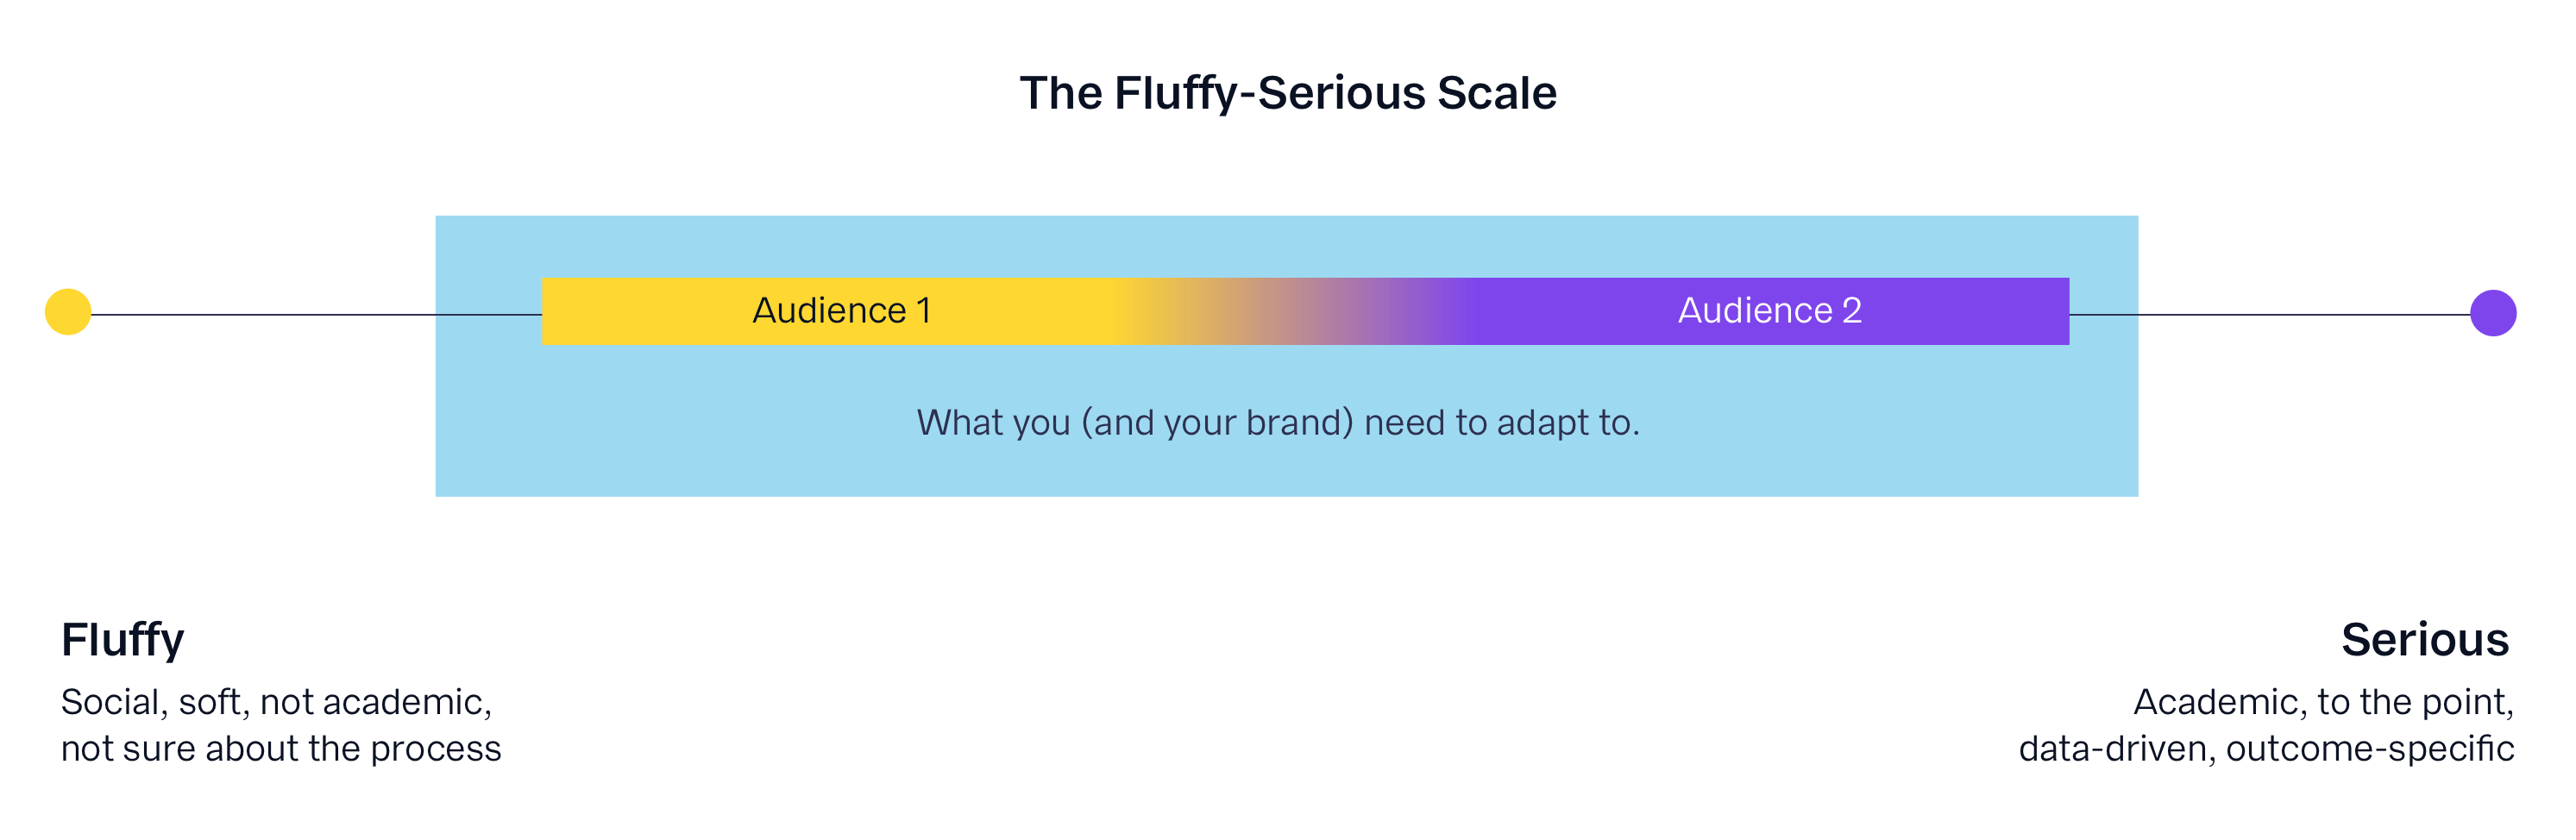 A scale showing “The Fluffy-Serious Scale”. There is illustrative text